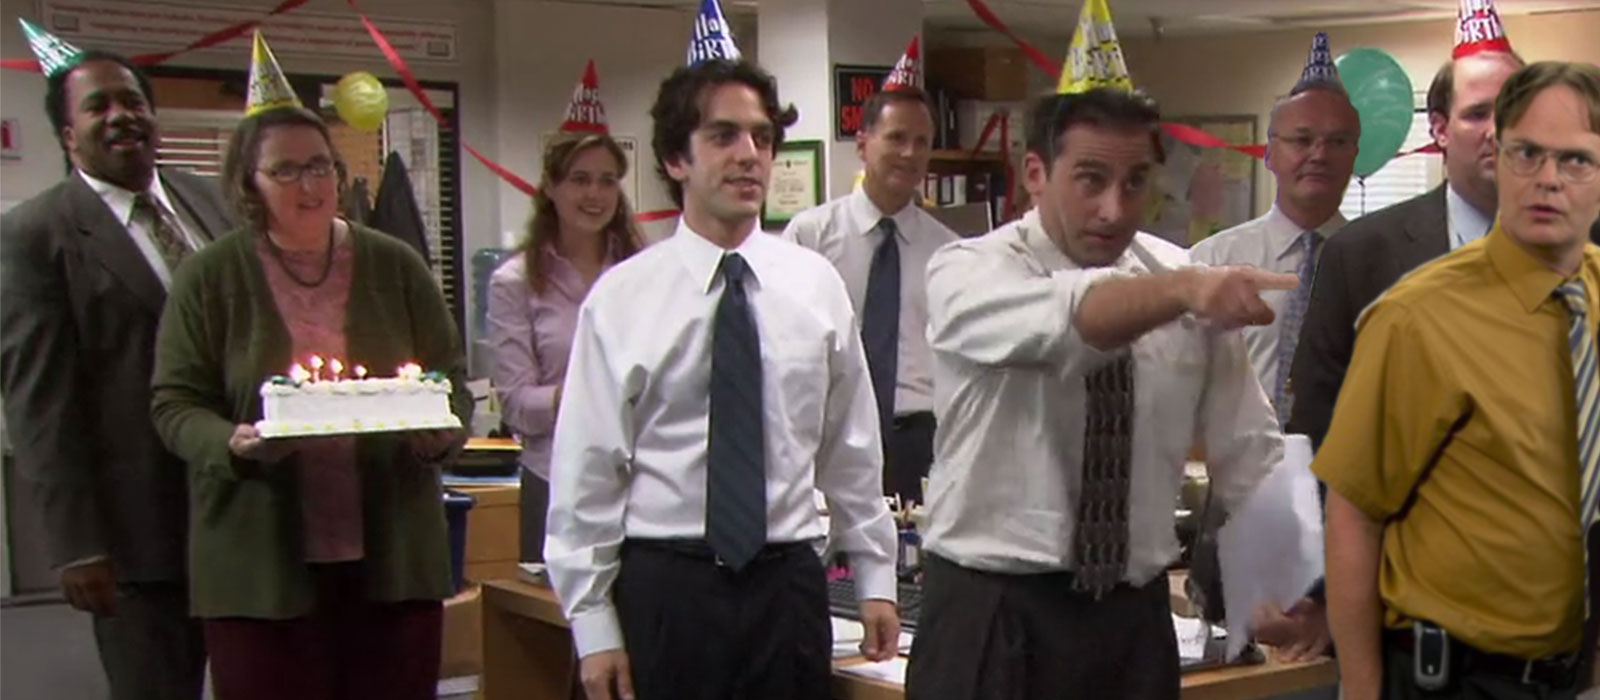 Office party